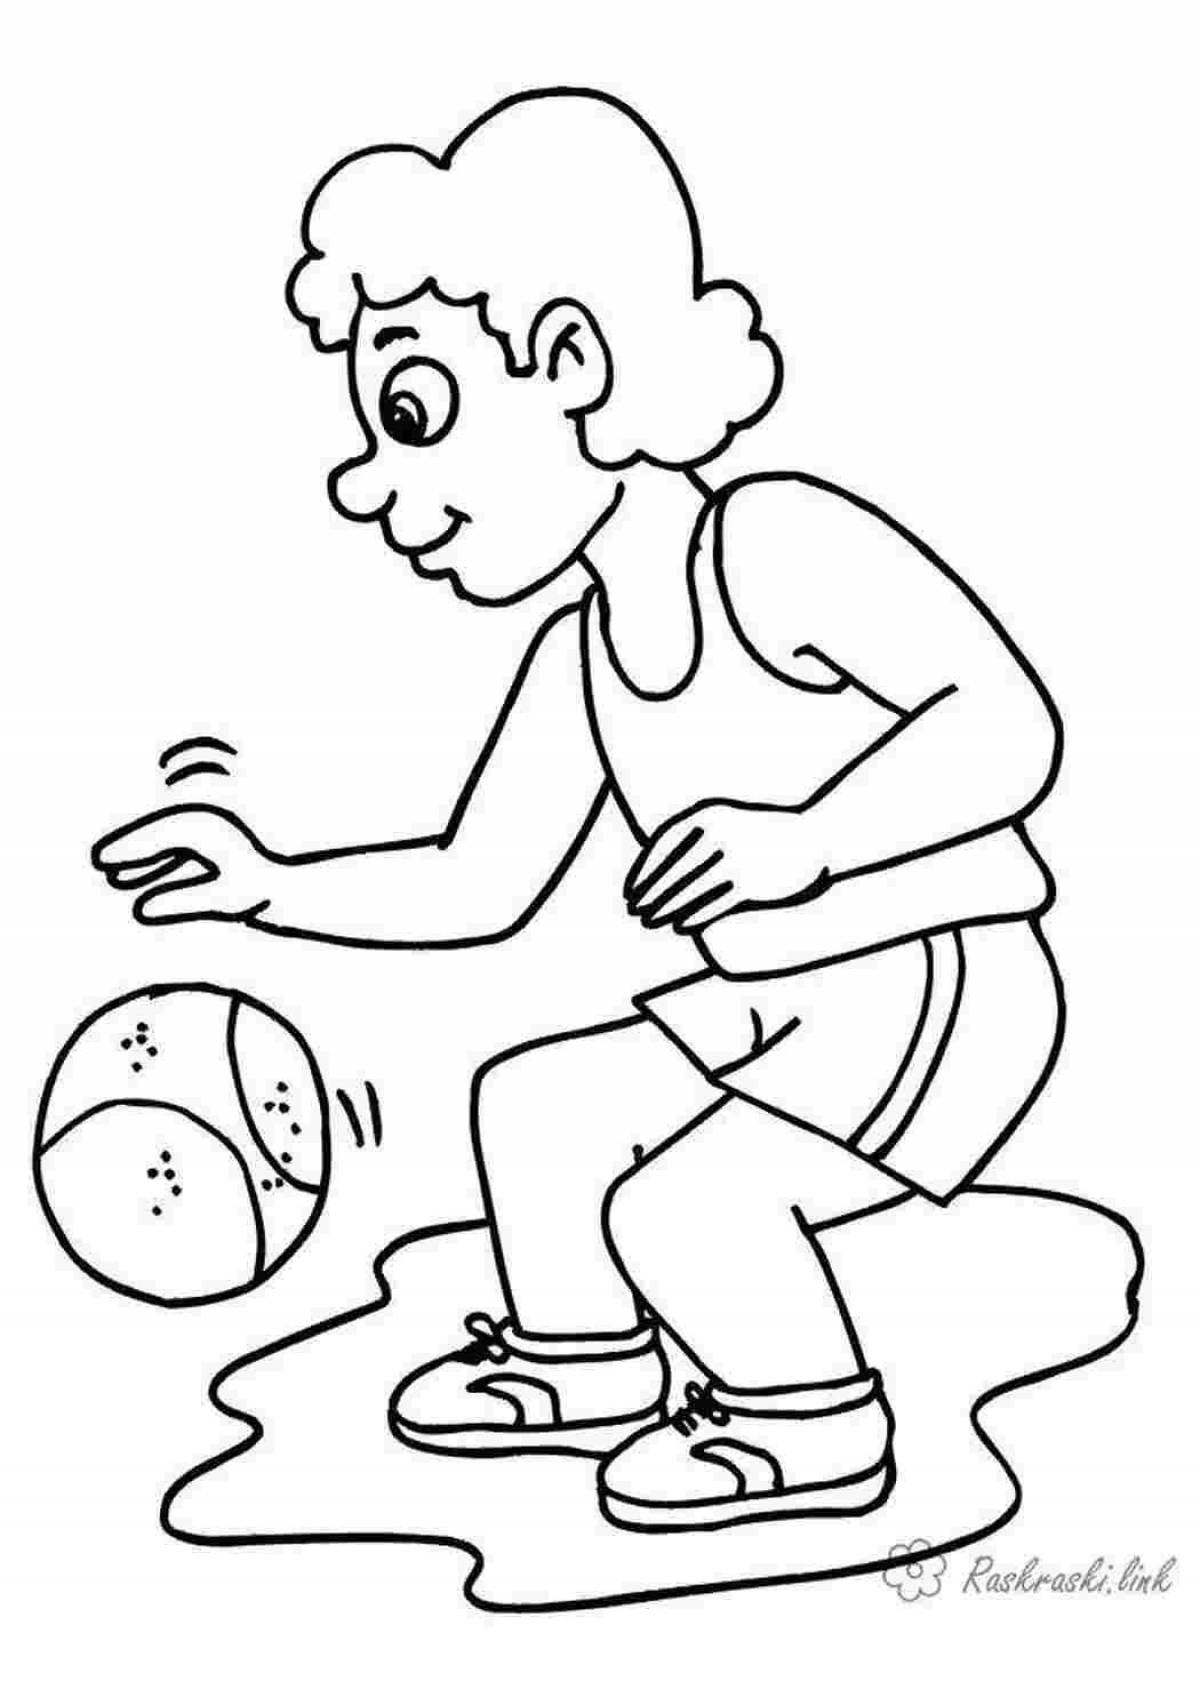 Colorful sports coloring book for 3-4 year olds